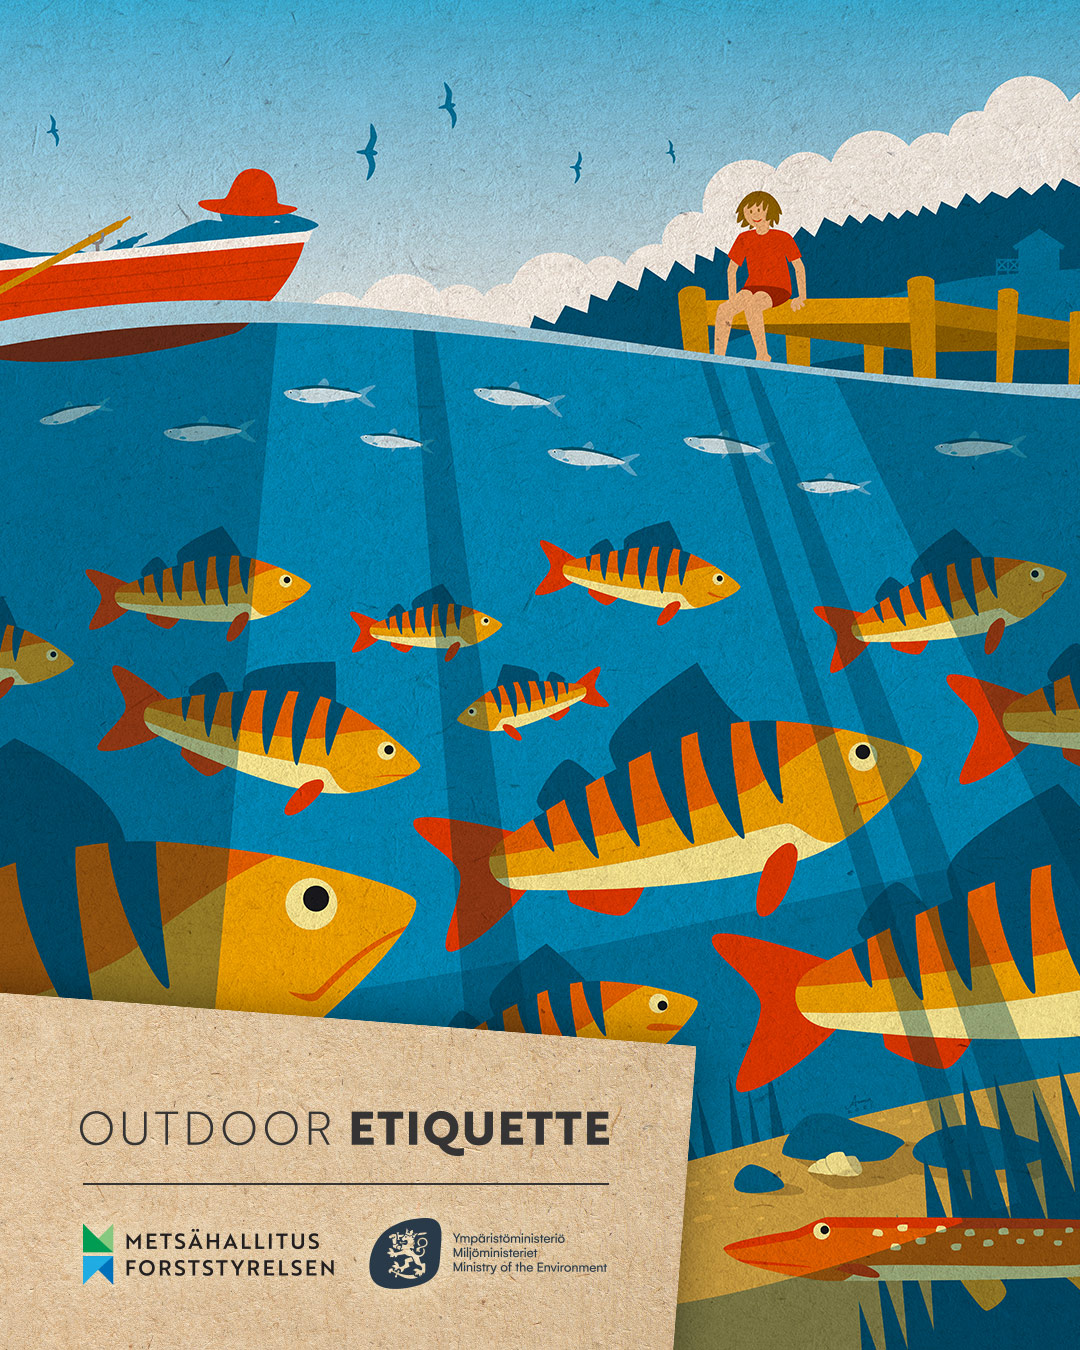 A person sitting on a pier looking at fish and the text at the bottom: Outdoor etiquette